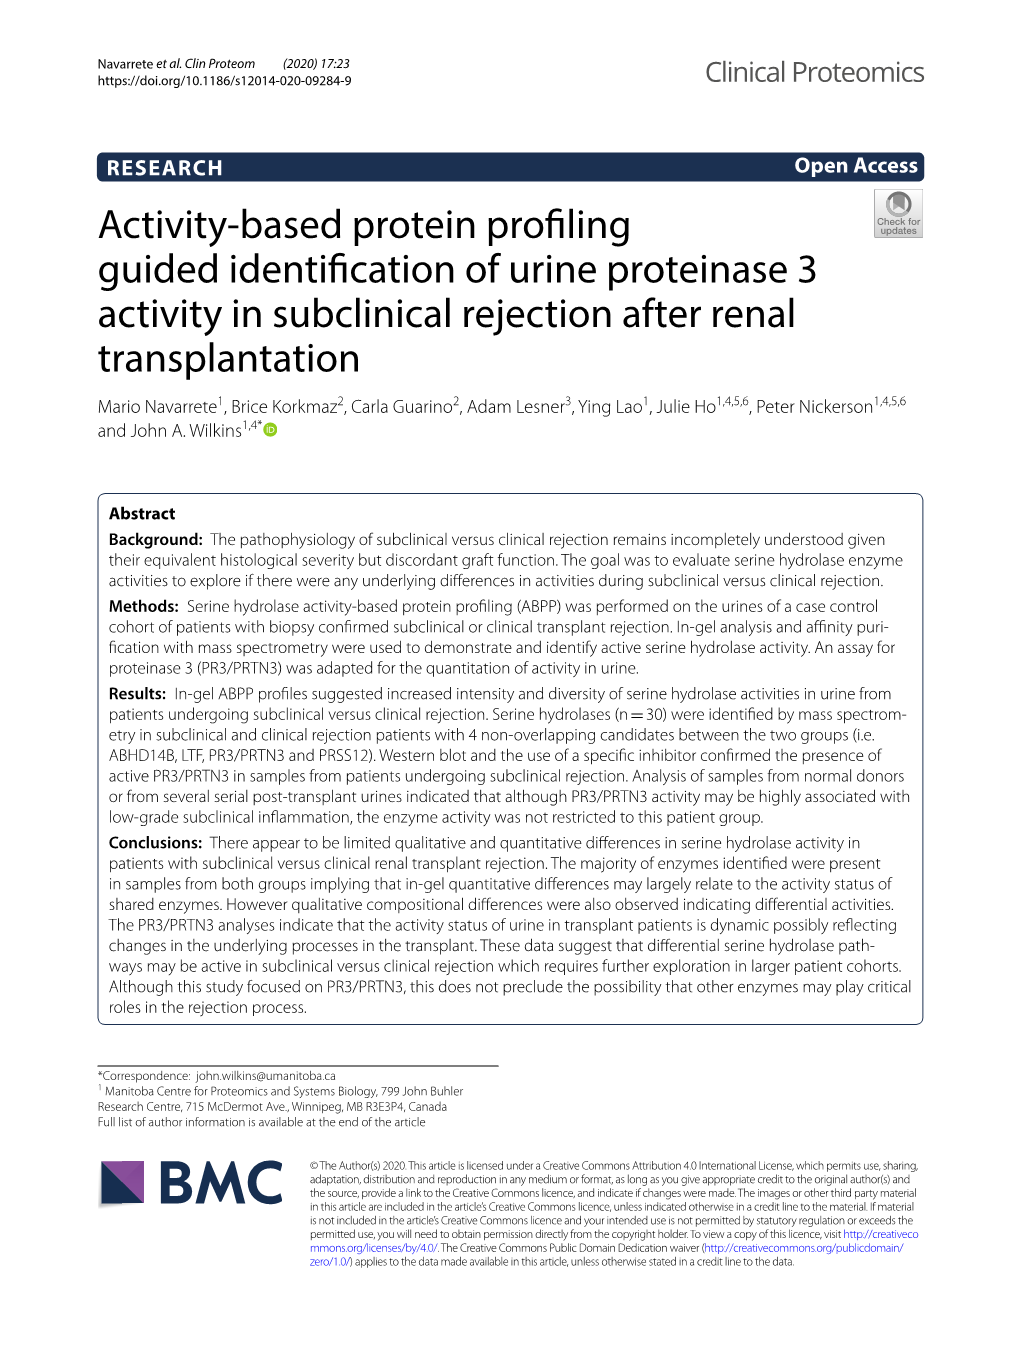 Activity-Based Protein Profiling Guided Identification of Urine Proteinase 3